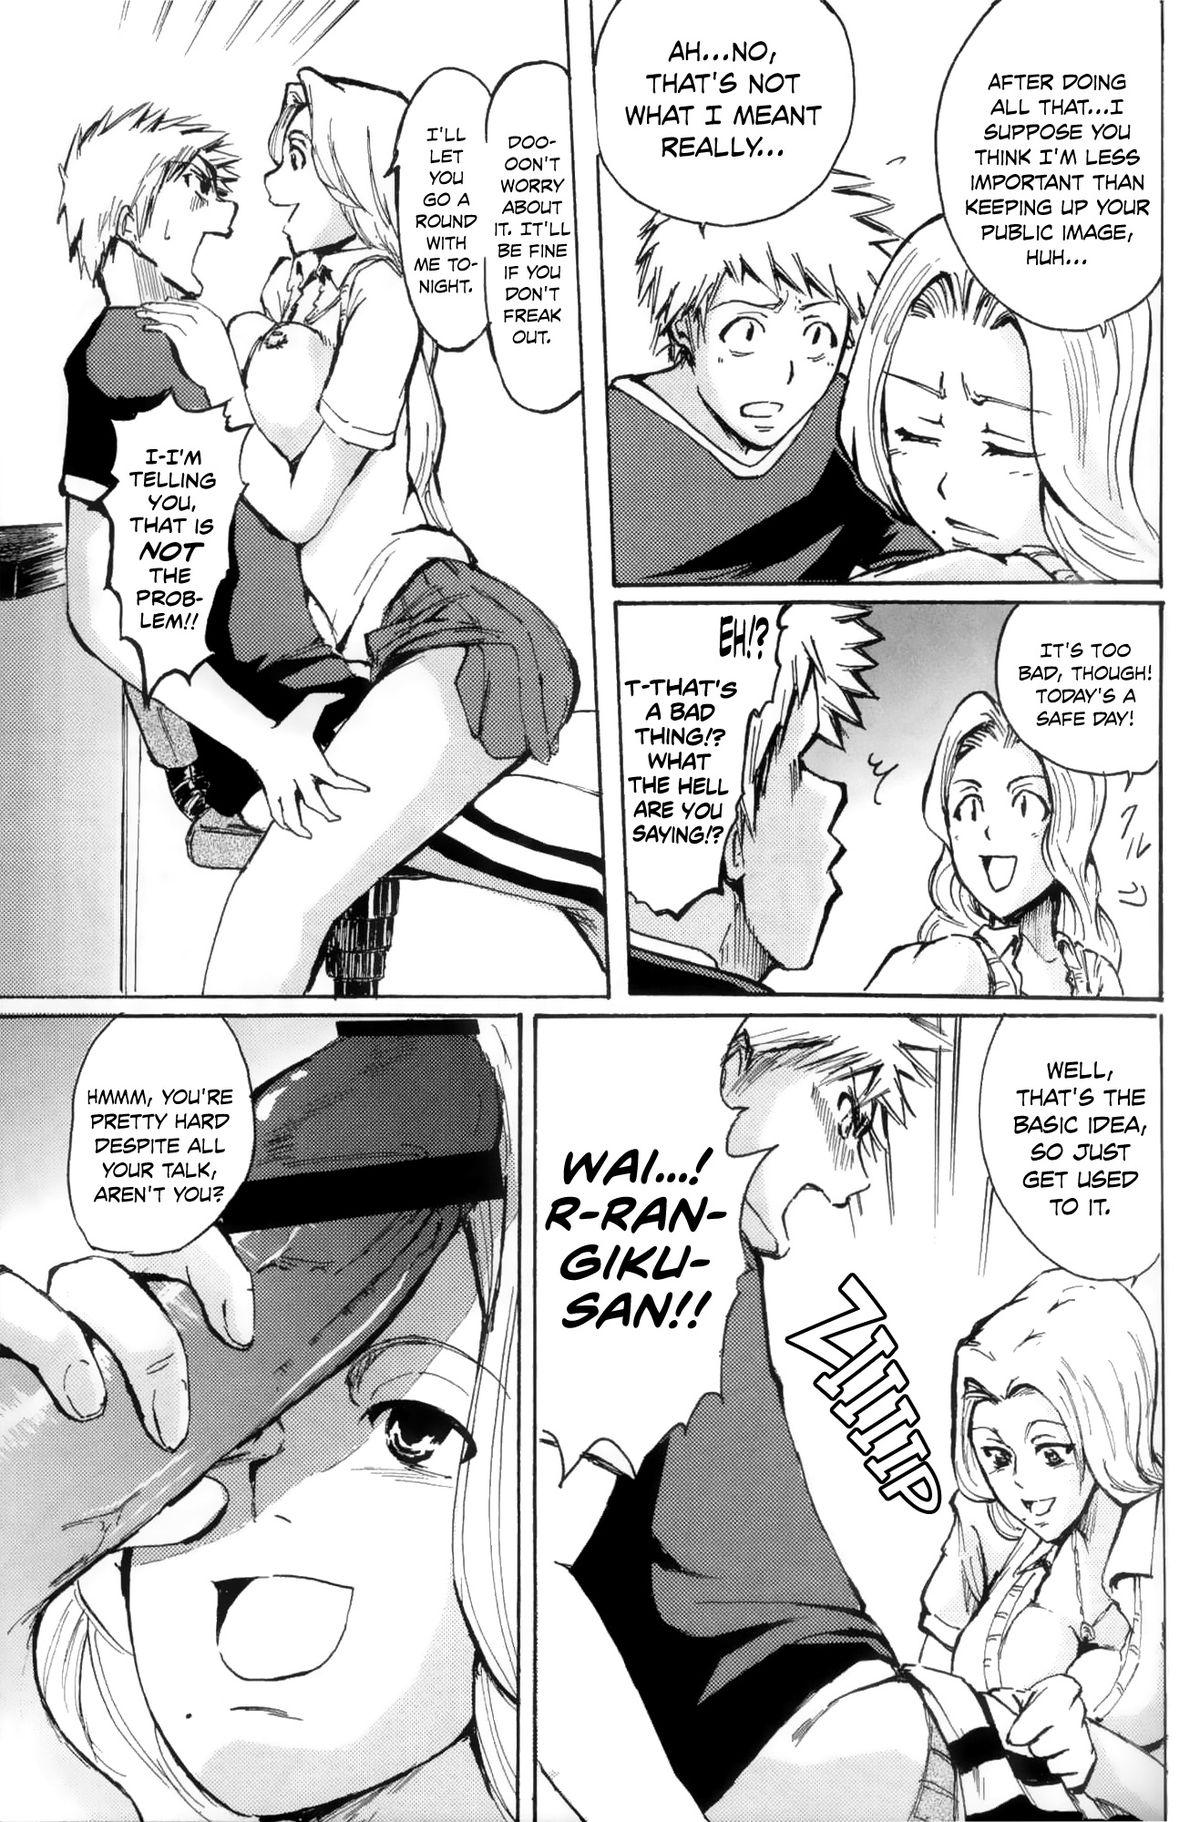 Virtual NO MERCY 4 - Bleach Hot Couple Sex - Page 6